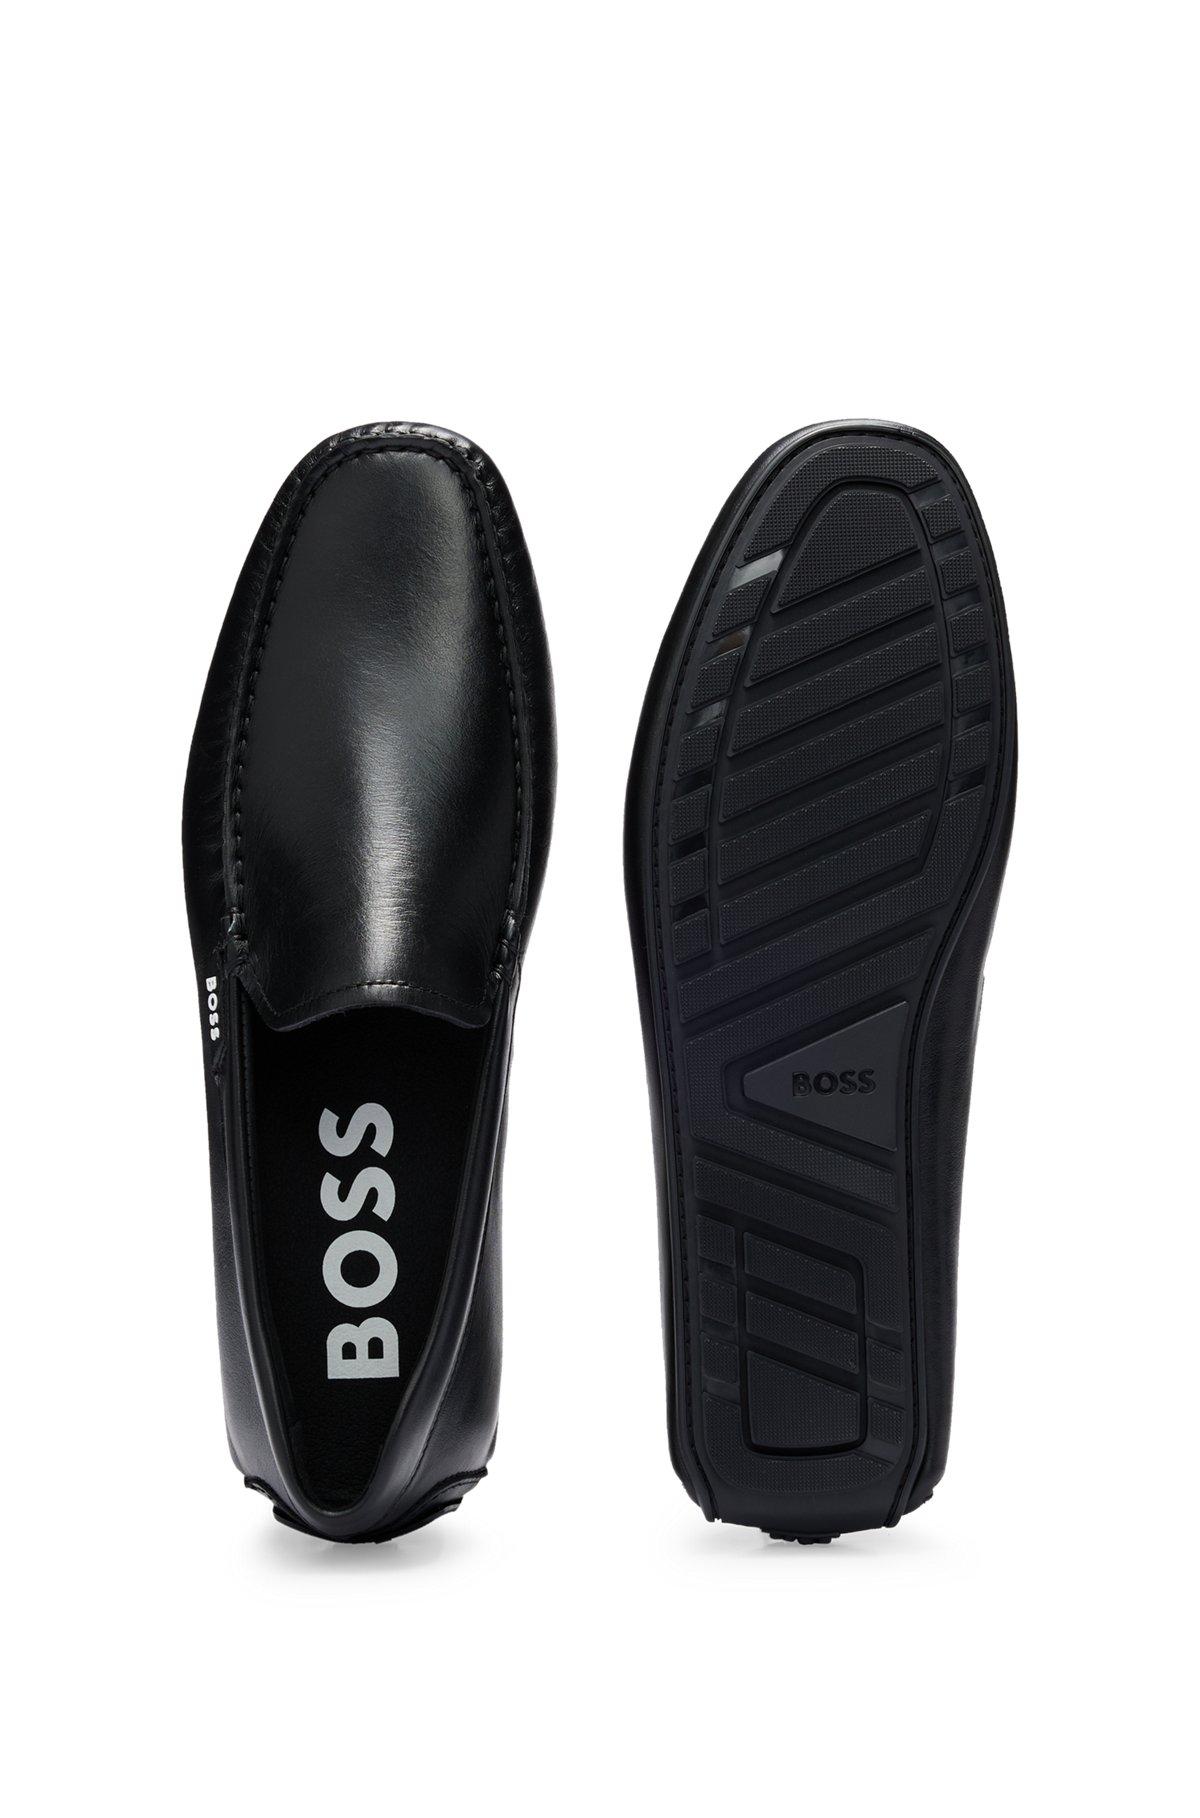 Nappa-leather moccasins with logo trim, Black